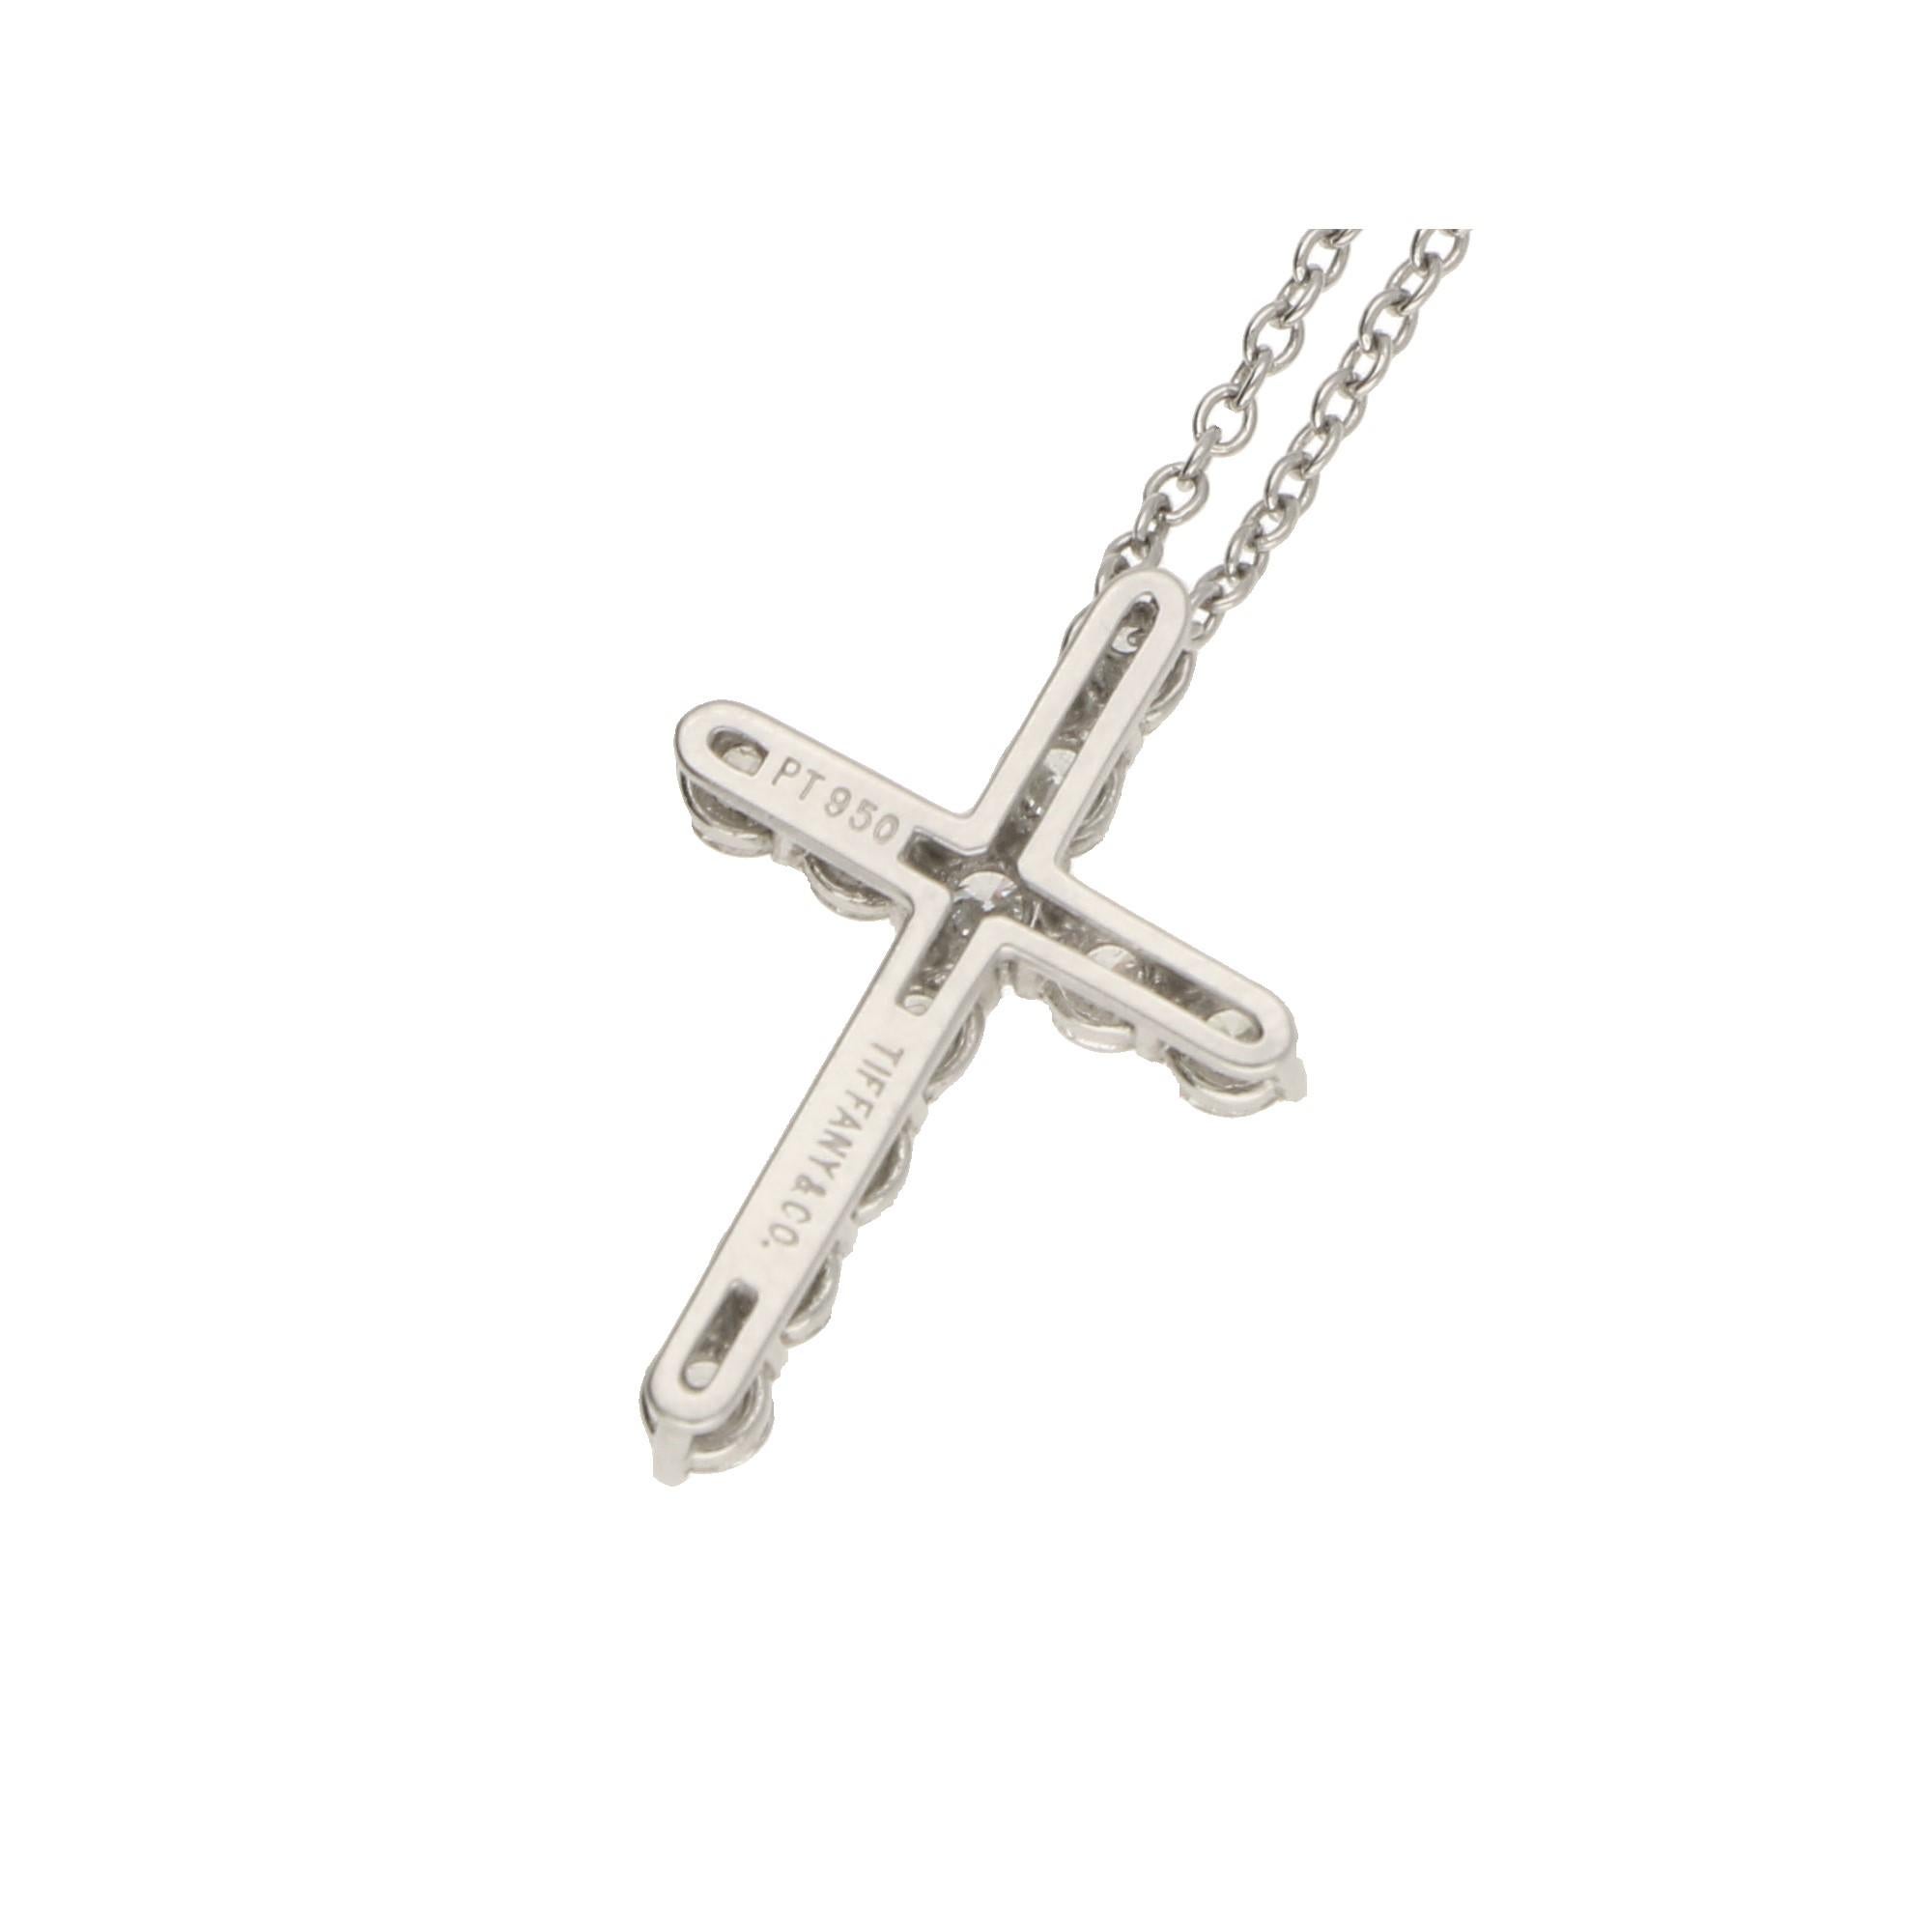 An elegant Tiffany & Co diamond cross pendant in platinum, featuring a platinum cross shared-claw-set throughout with eleven round brilliant-cut diamonds with a combined weight of 0.42 carats, F/G colour (assessed), VS clarity (assessed), fitted on